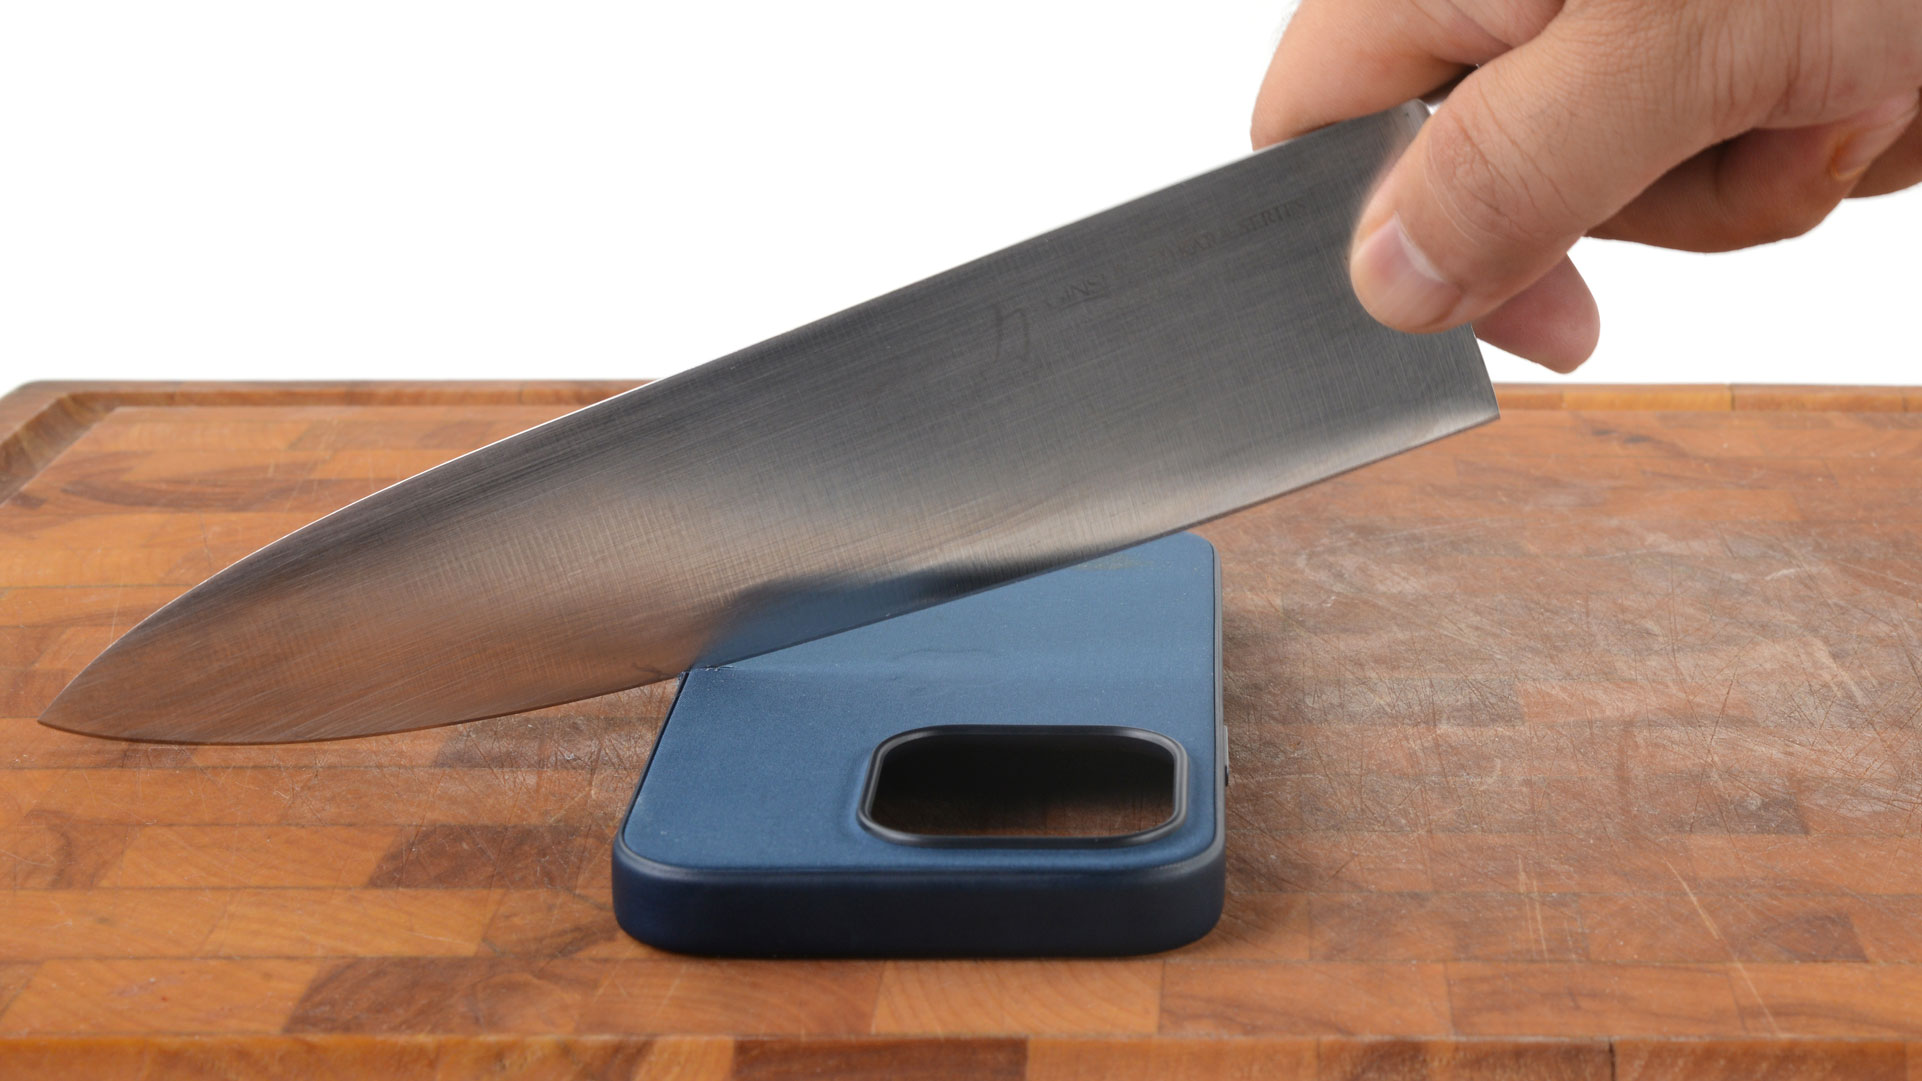 A kitchen knife cutting an iPhone case on a butting board